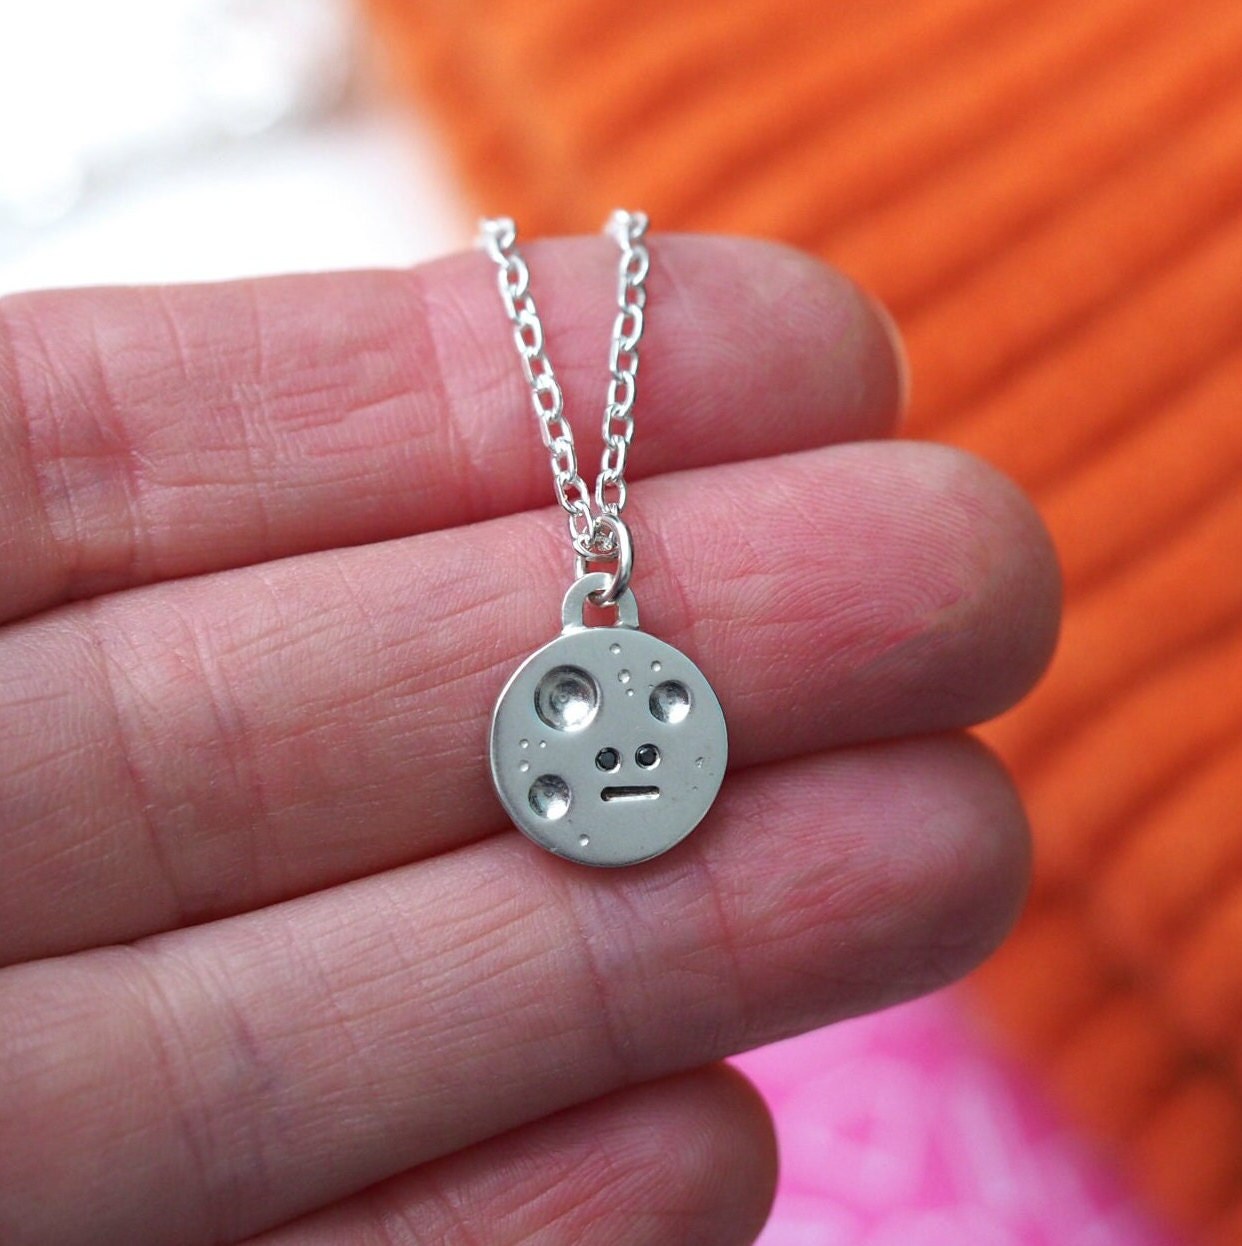 Full Moon Necklace - Recycled Silver and Black Diamonds